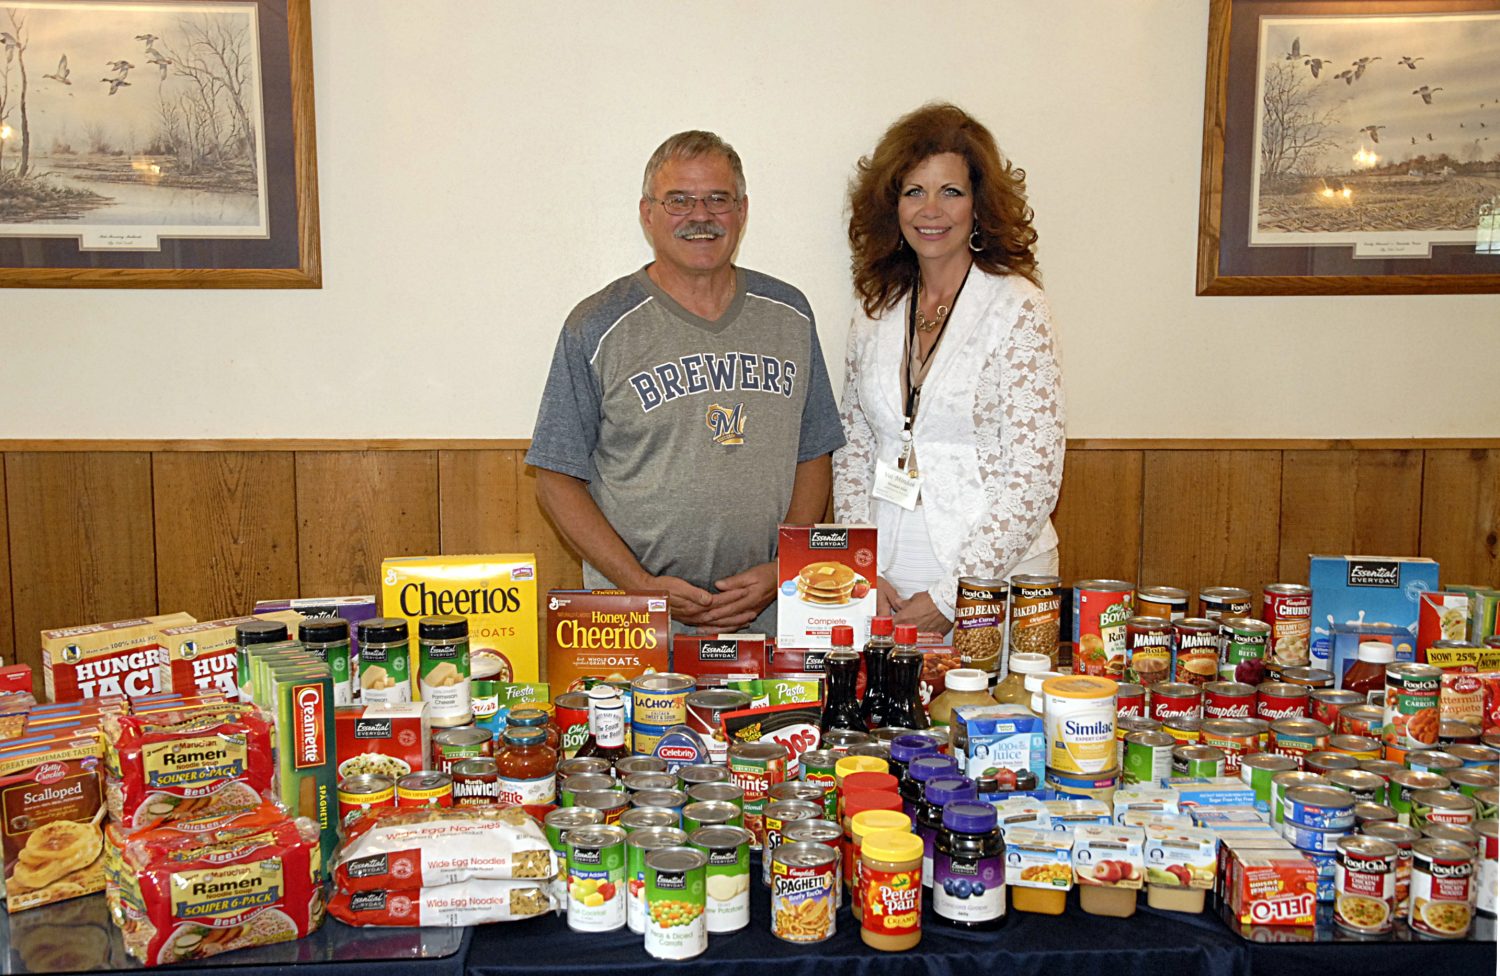 Merrill Rotary Club donates over 300 lbs of groceries to food pantry